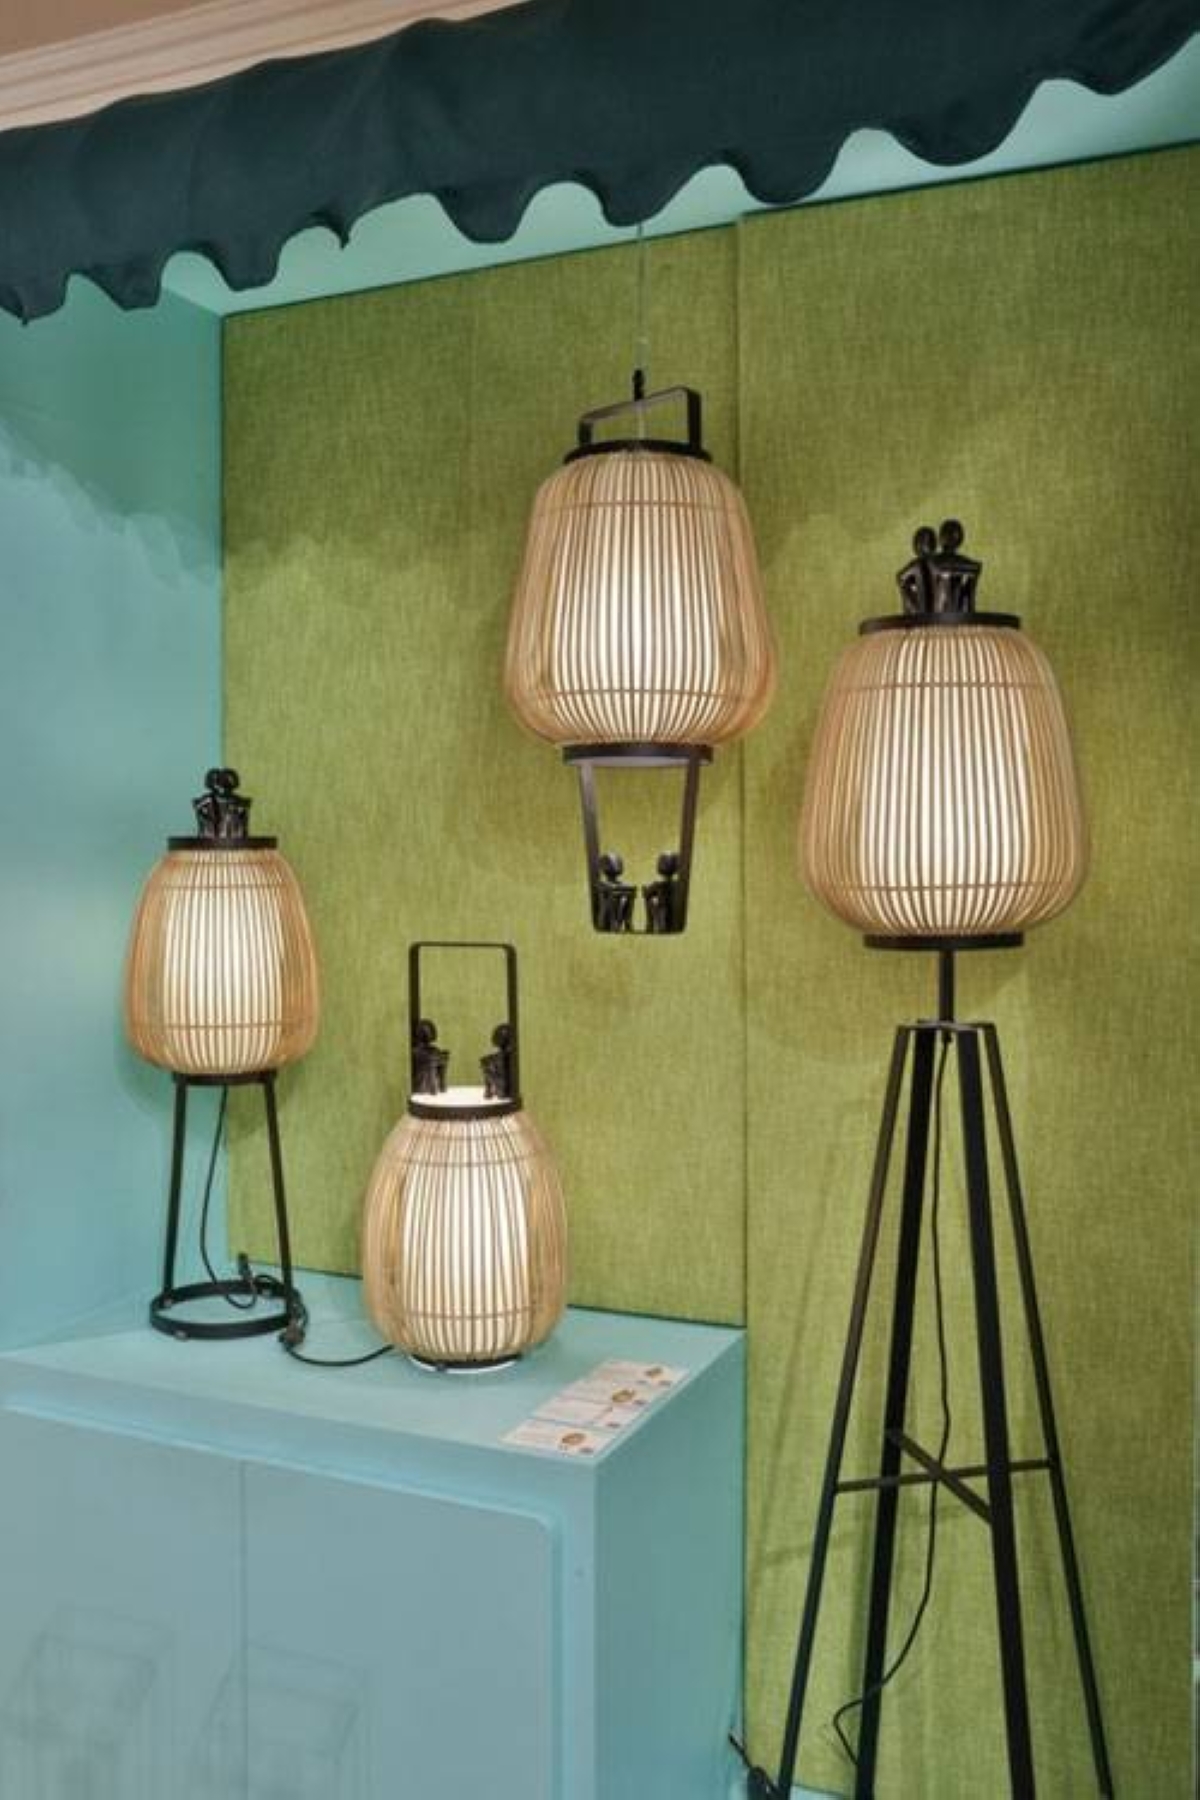 The lamps effortlessly set the mood for relaxation and tranquility.